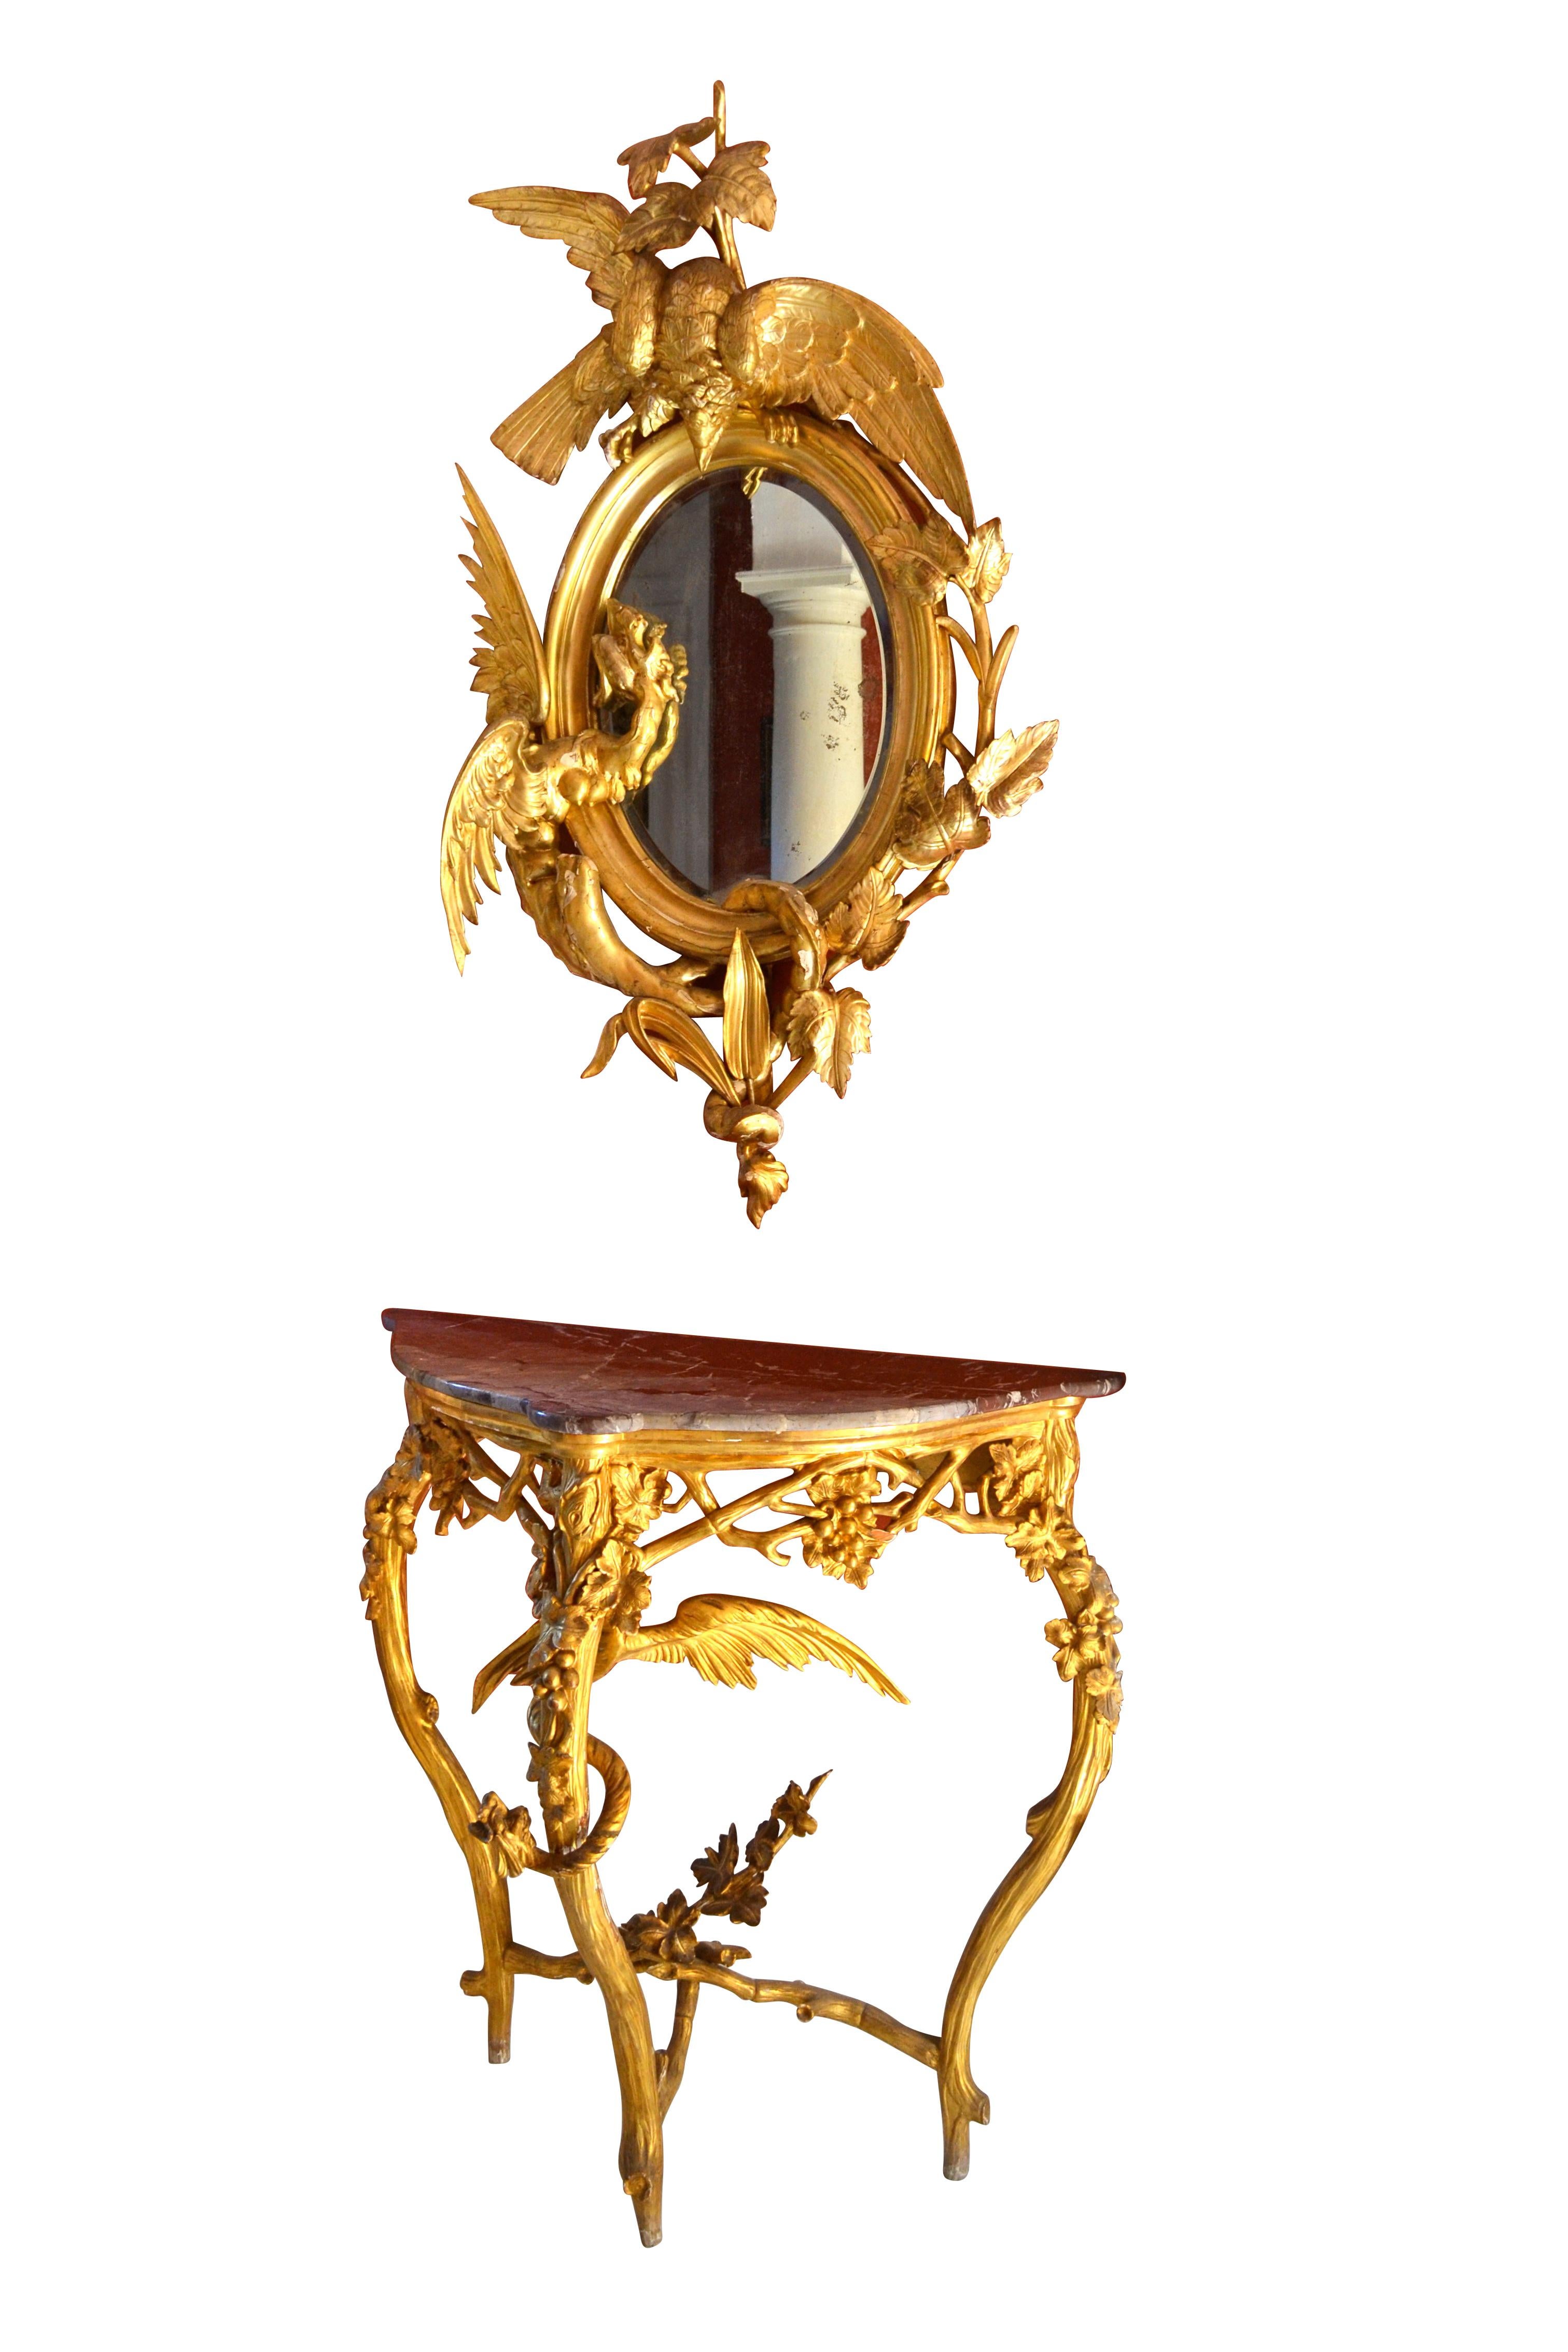 A rare, unique and dramatic pair of Rococo style marble topped giltwood triangular shaped consoles and complimentary slightly elliptical giltwood mirrors. The four pieces are believed to be northern Italian most likely from the Venetian region. The